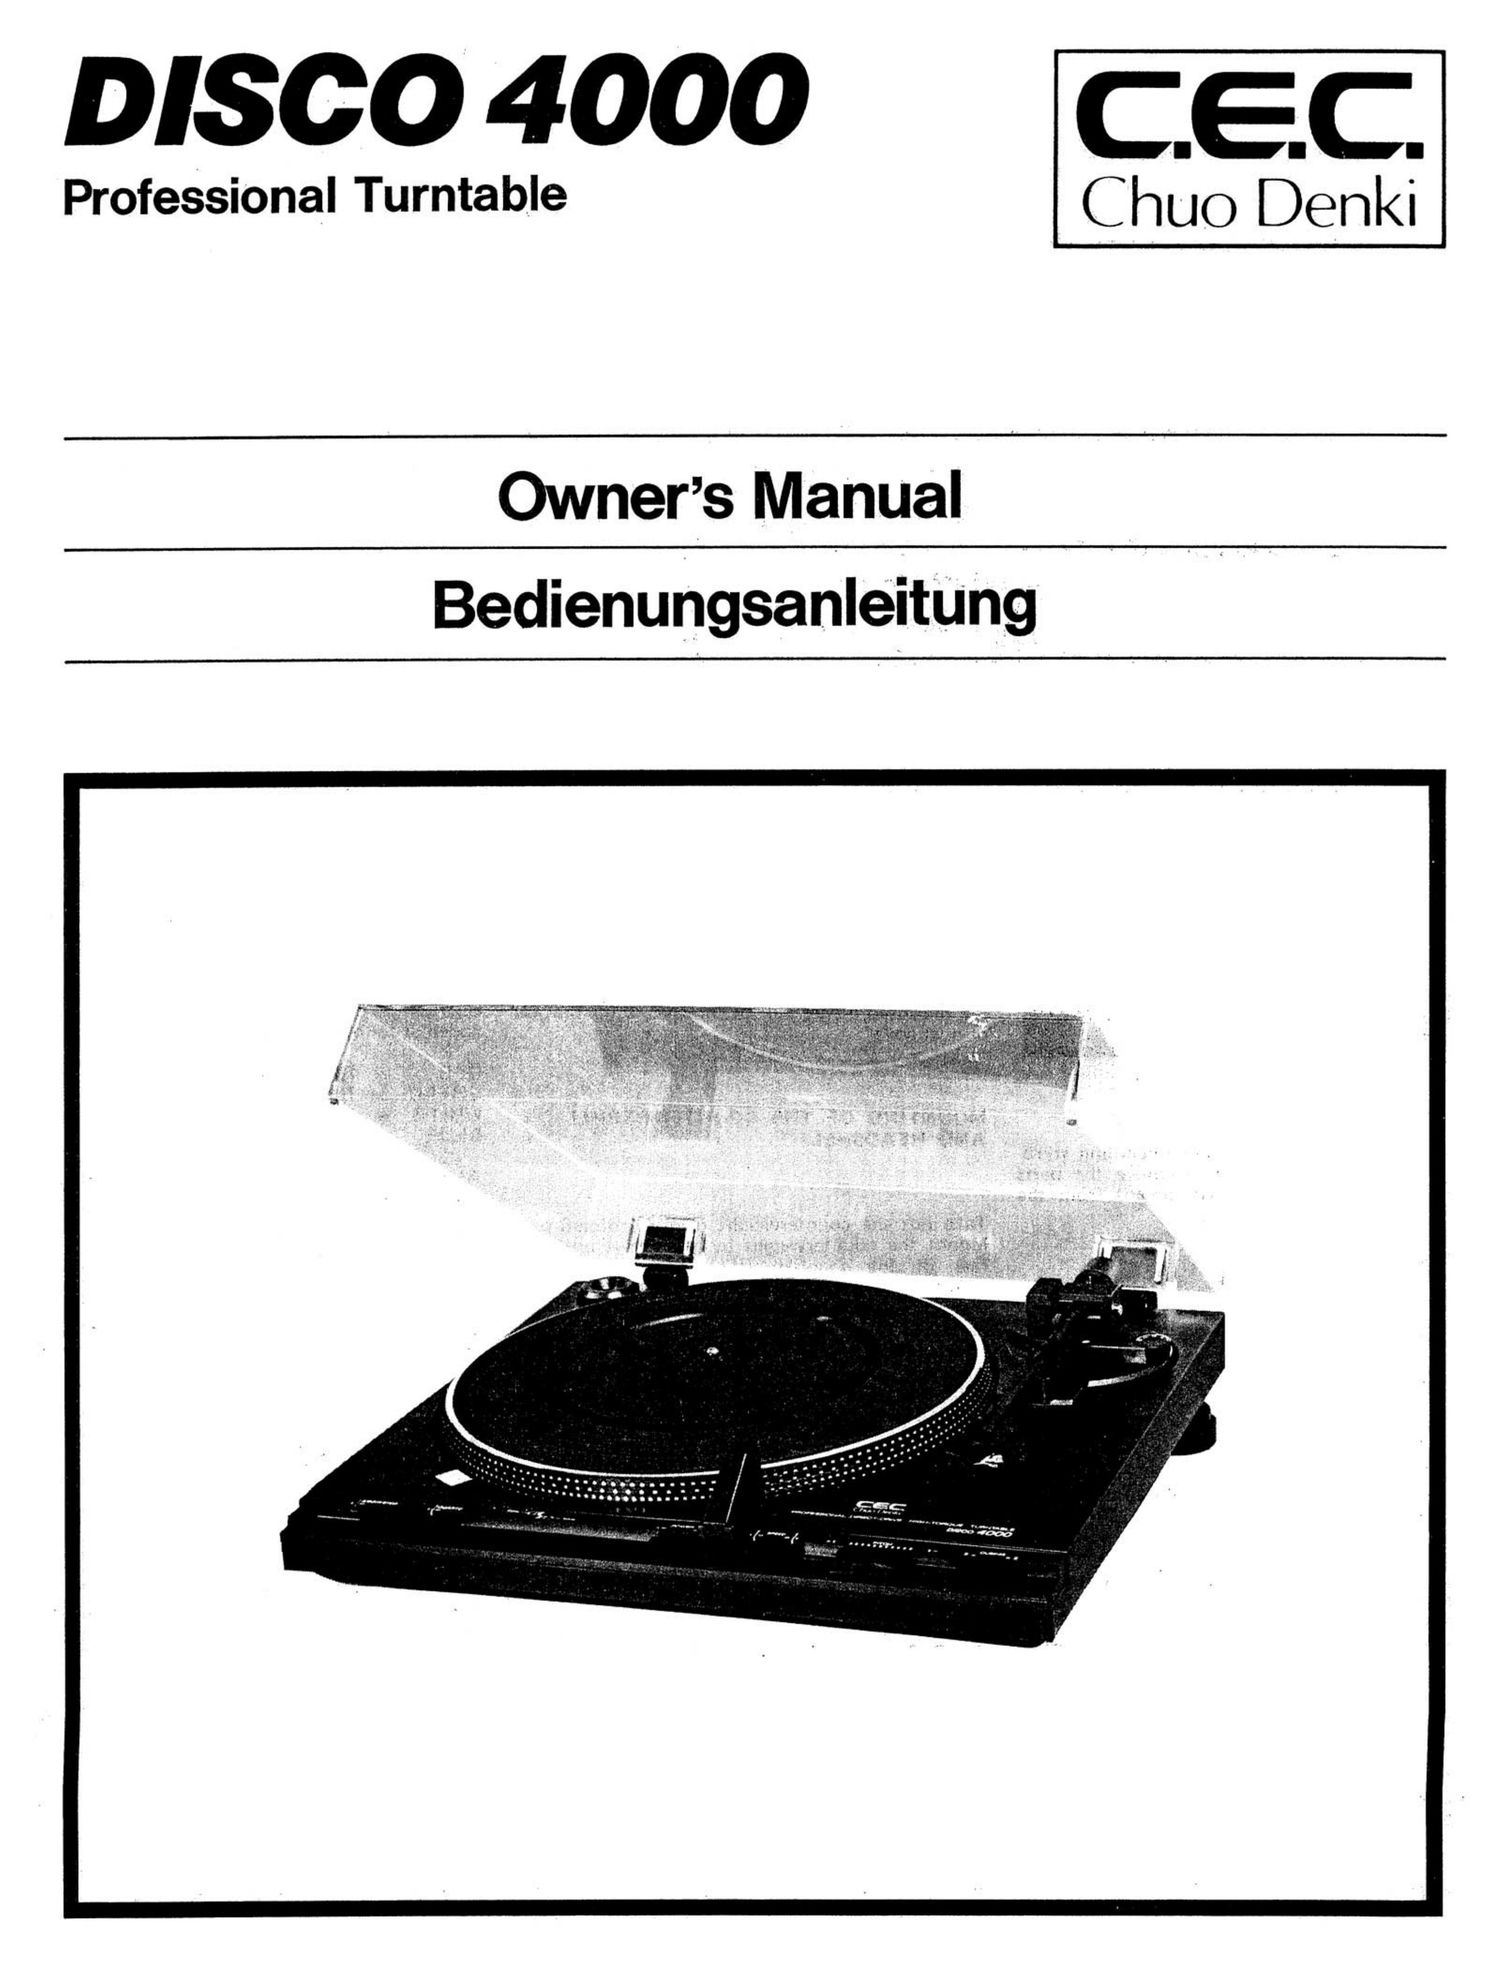 Cec Disco 4000 Owners Manual